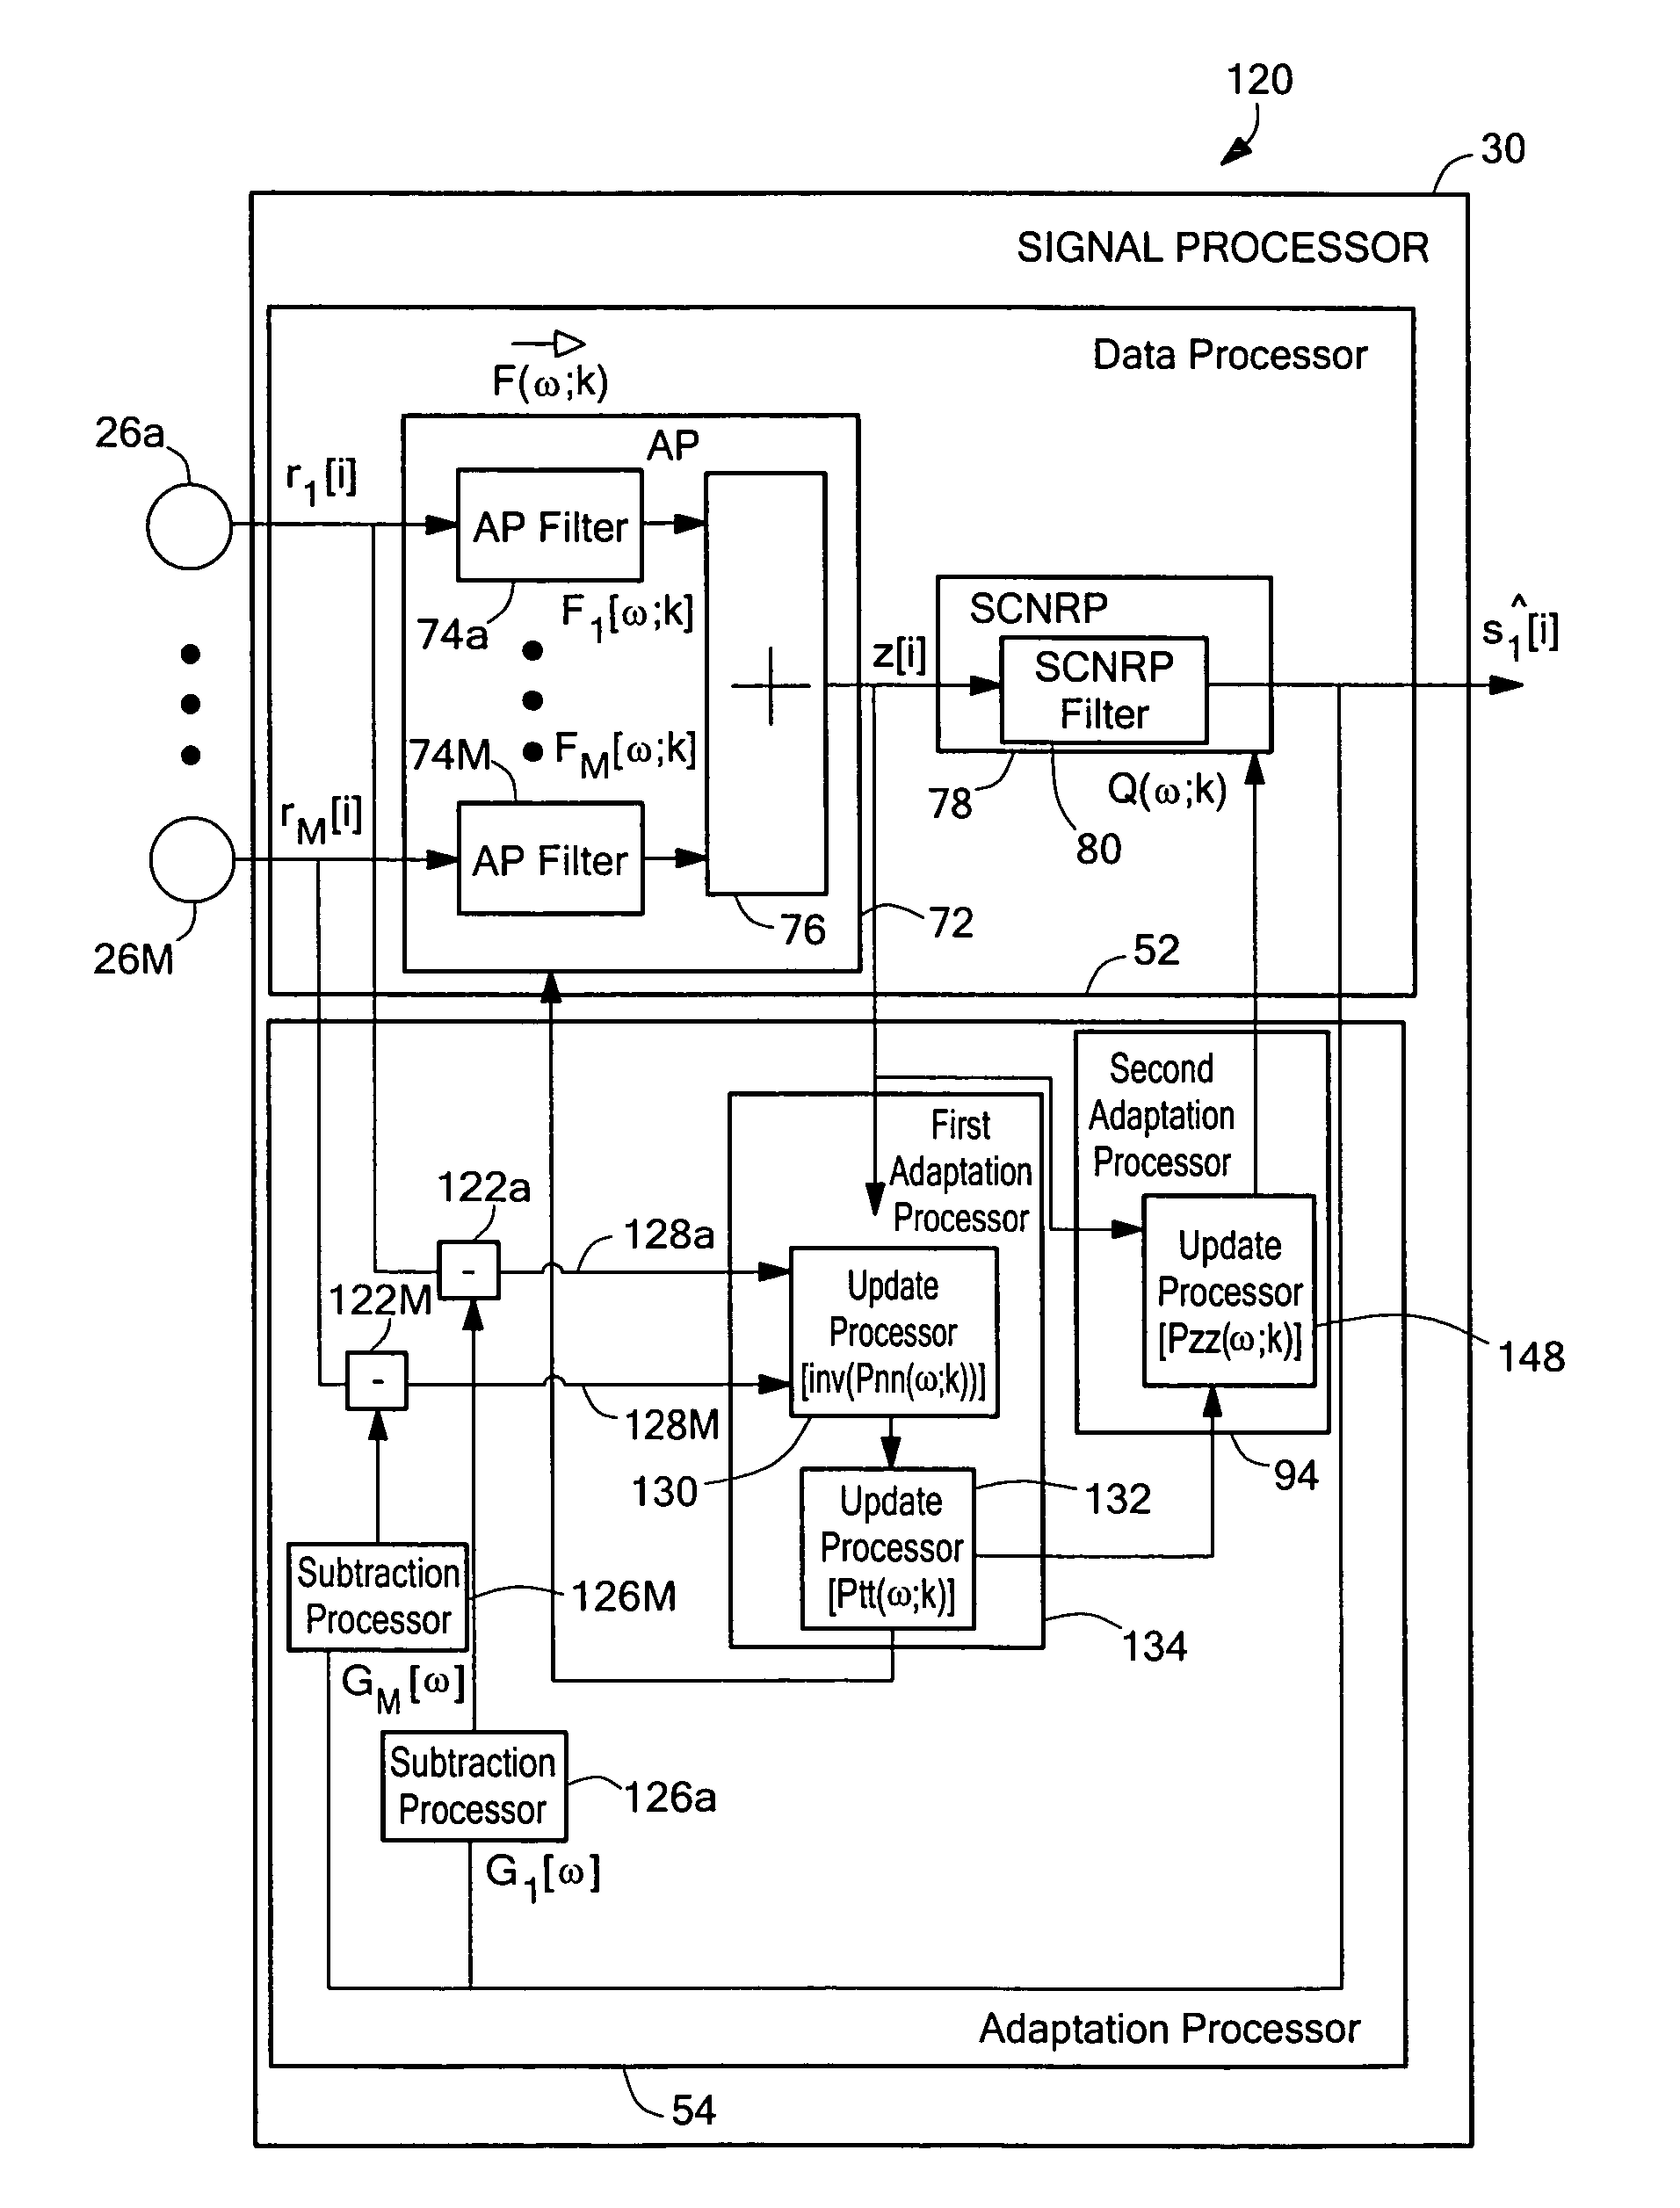 System and method for noise reduction having first and second adaptive filters responsive to a stored vector